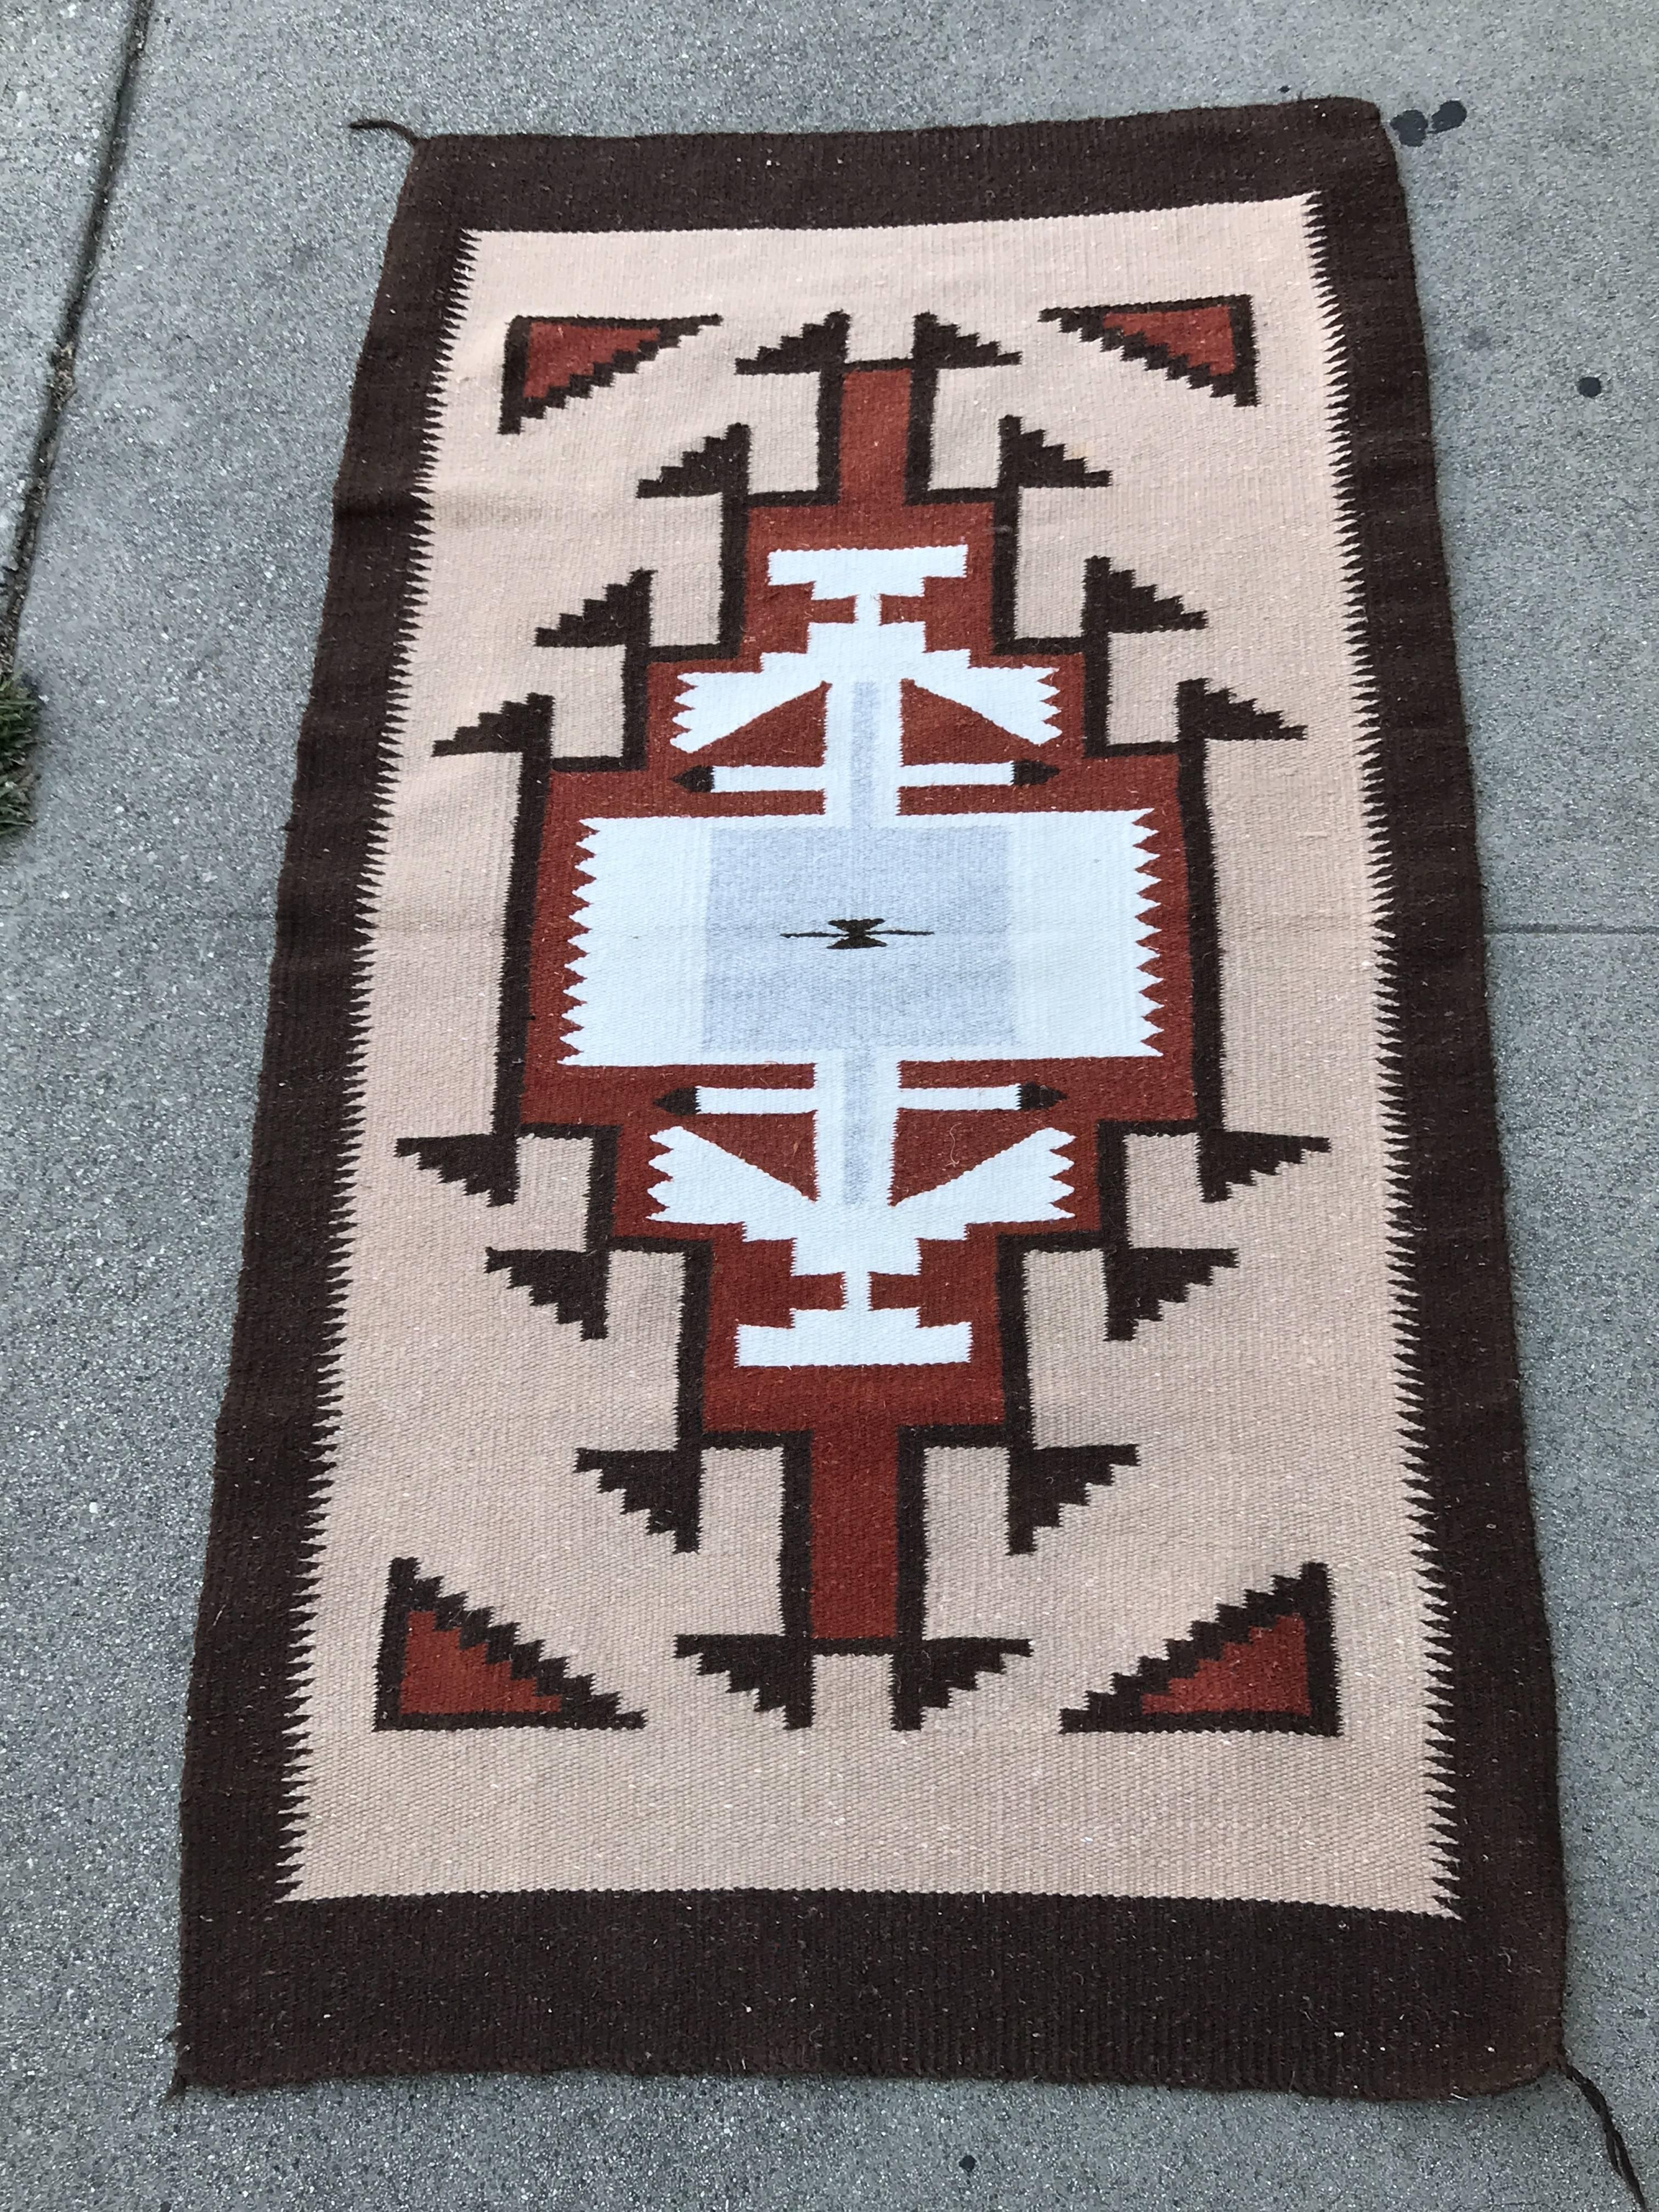 This handwoven wool rug was produced by the Navajo nation sometime during the mid-20th century. The geometric pattern contrasts the use of dark brown line with a white centre and earthy red fill colors.